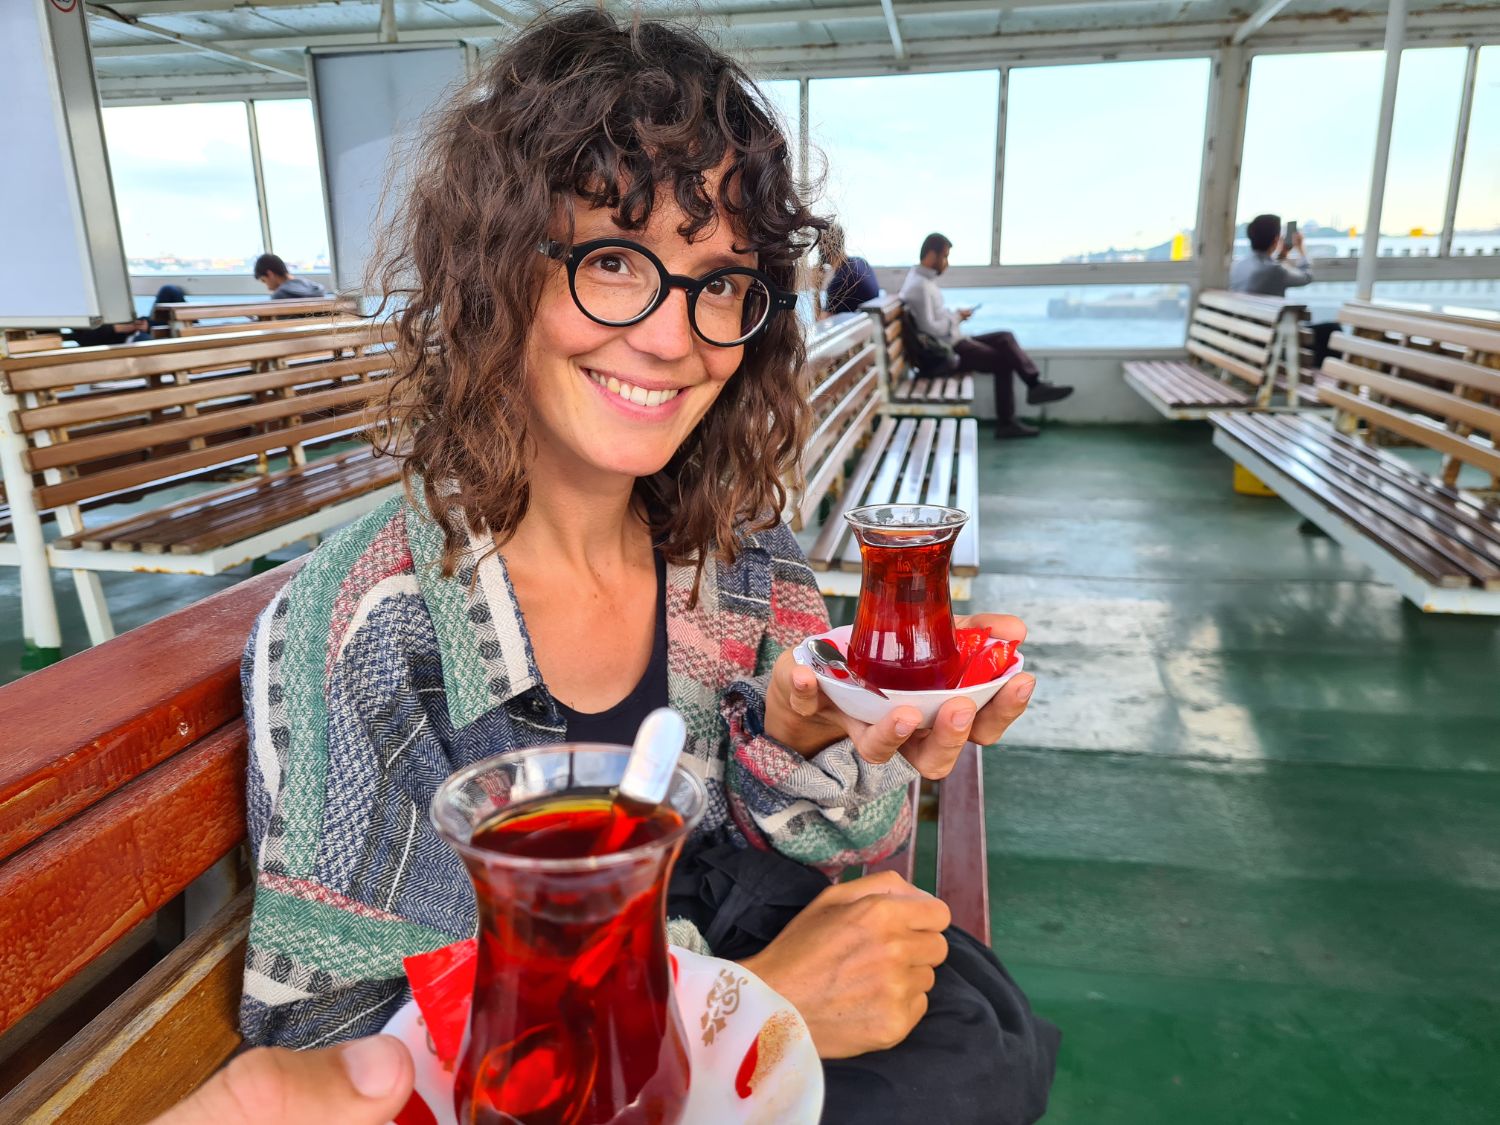 Tea everywhere, even on the ferry